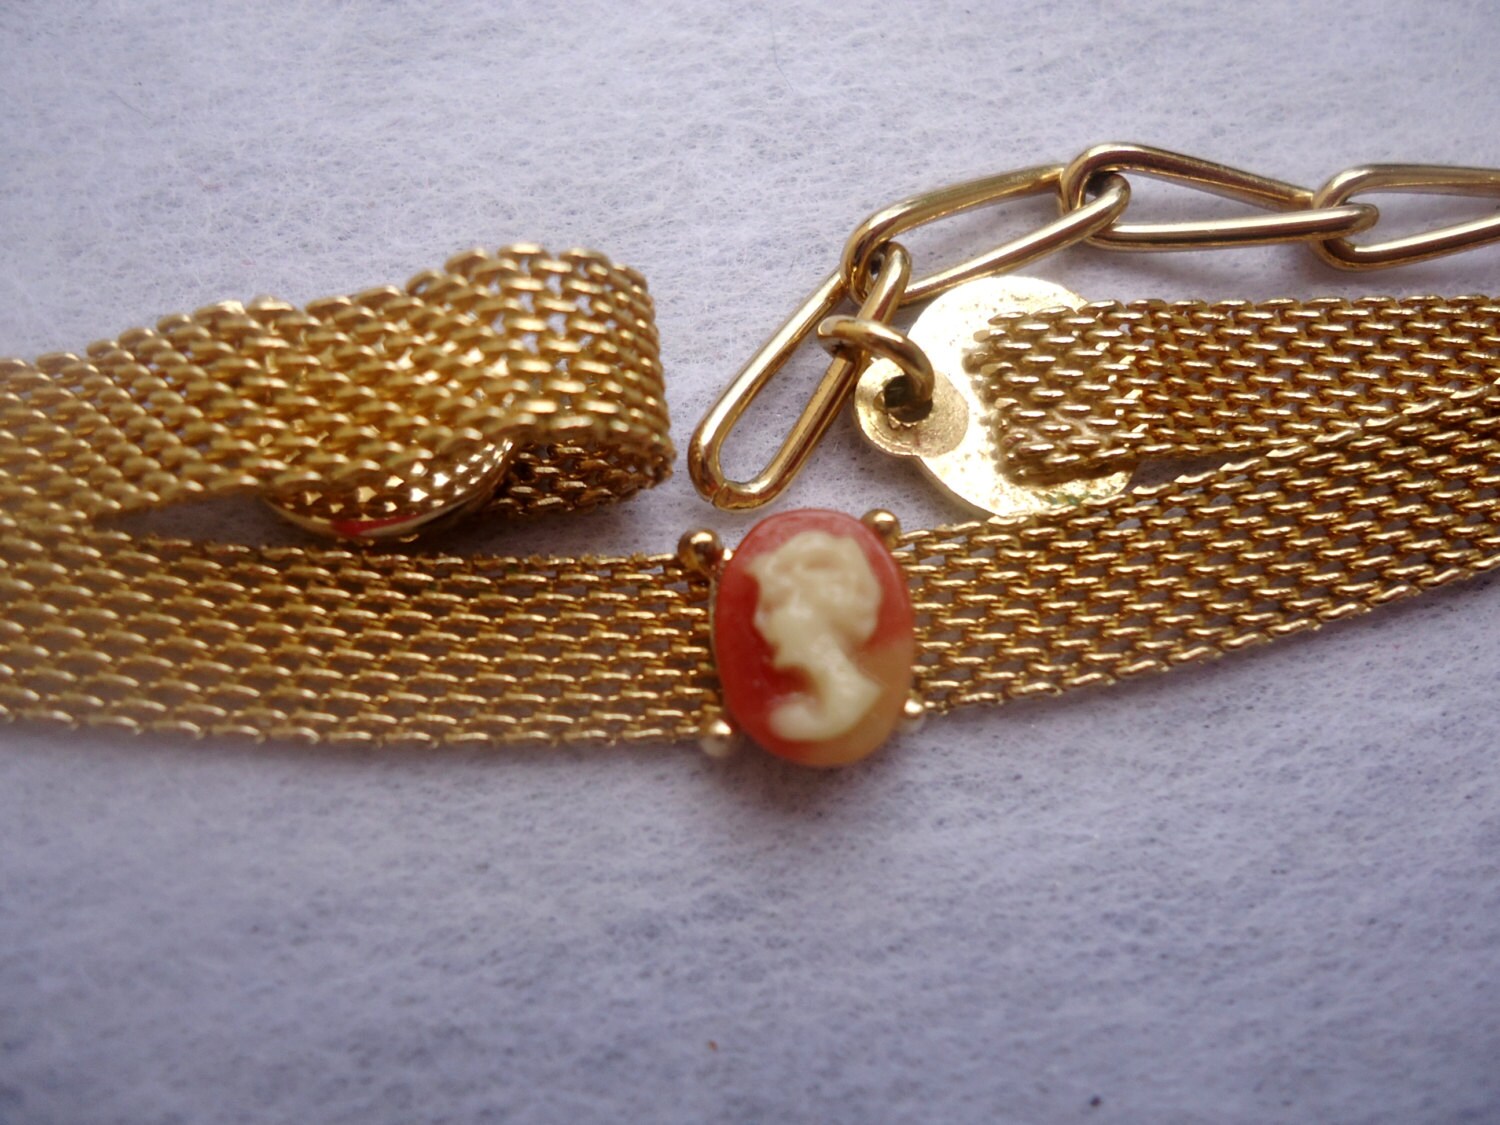 Vintage Gold Tone Mesh Choker Necklace with Cameo Circa